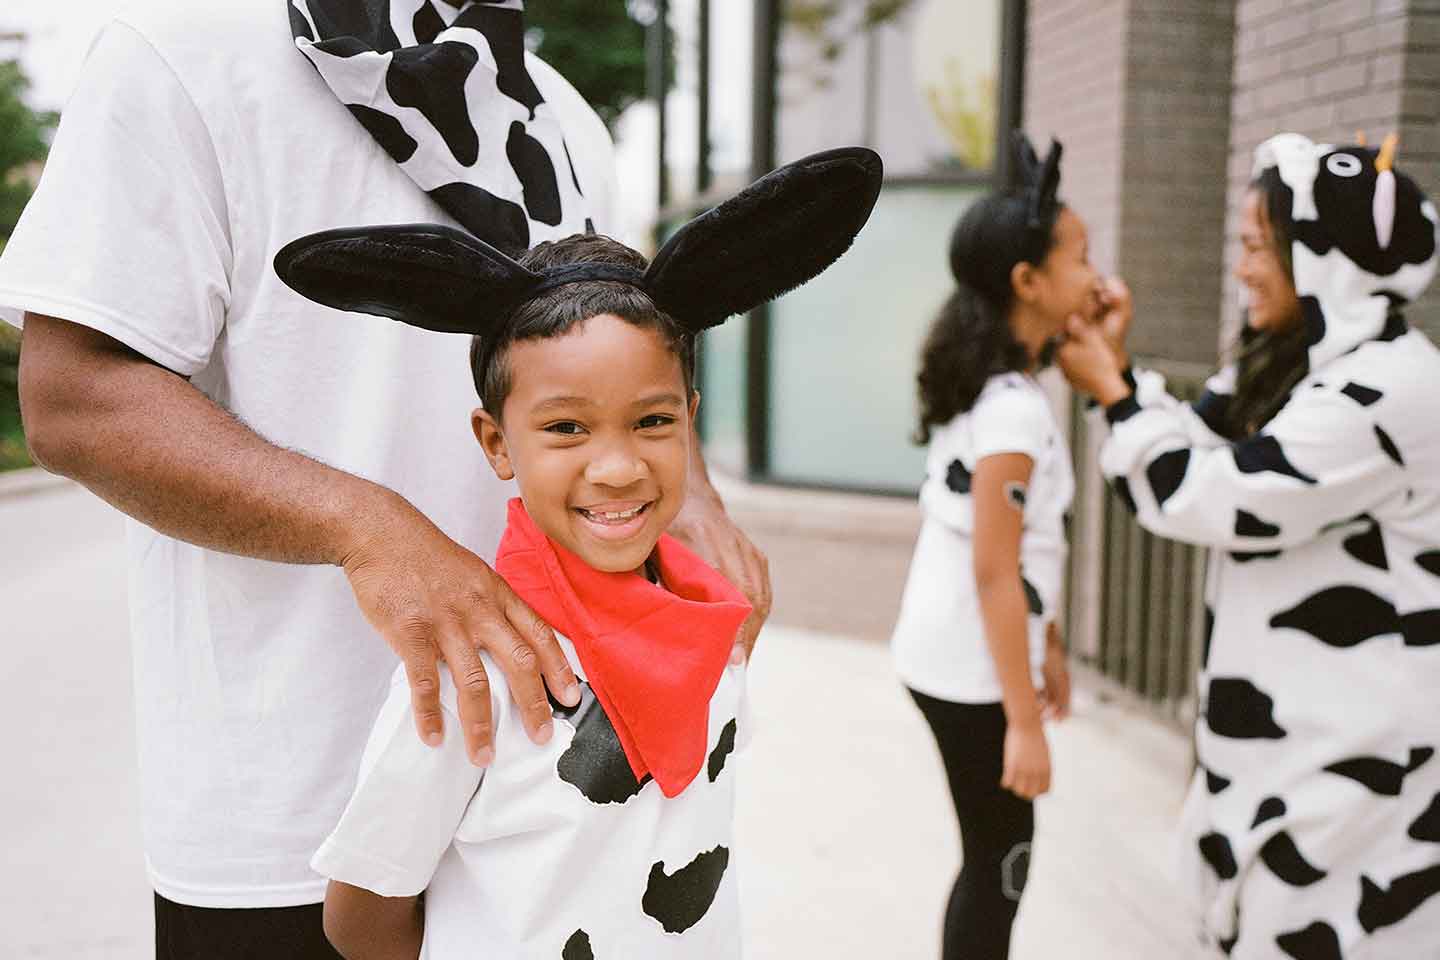 chick-fil-a-to-offer-free-food-this-tuesday-for-15th-annual-cow